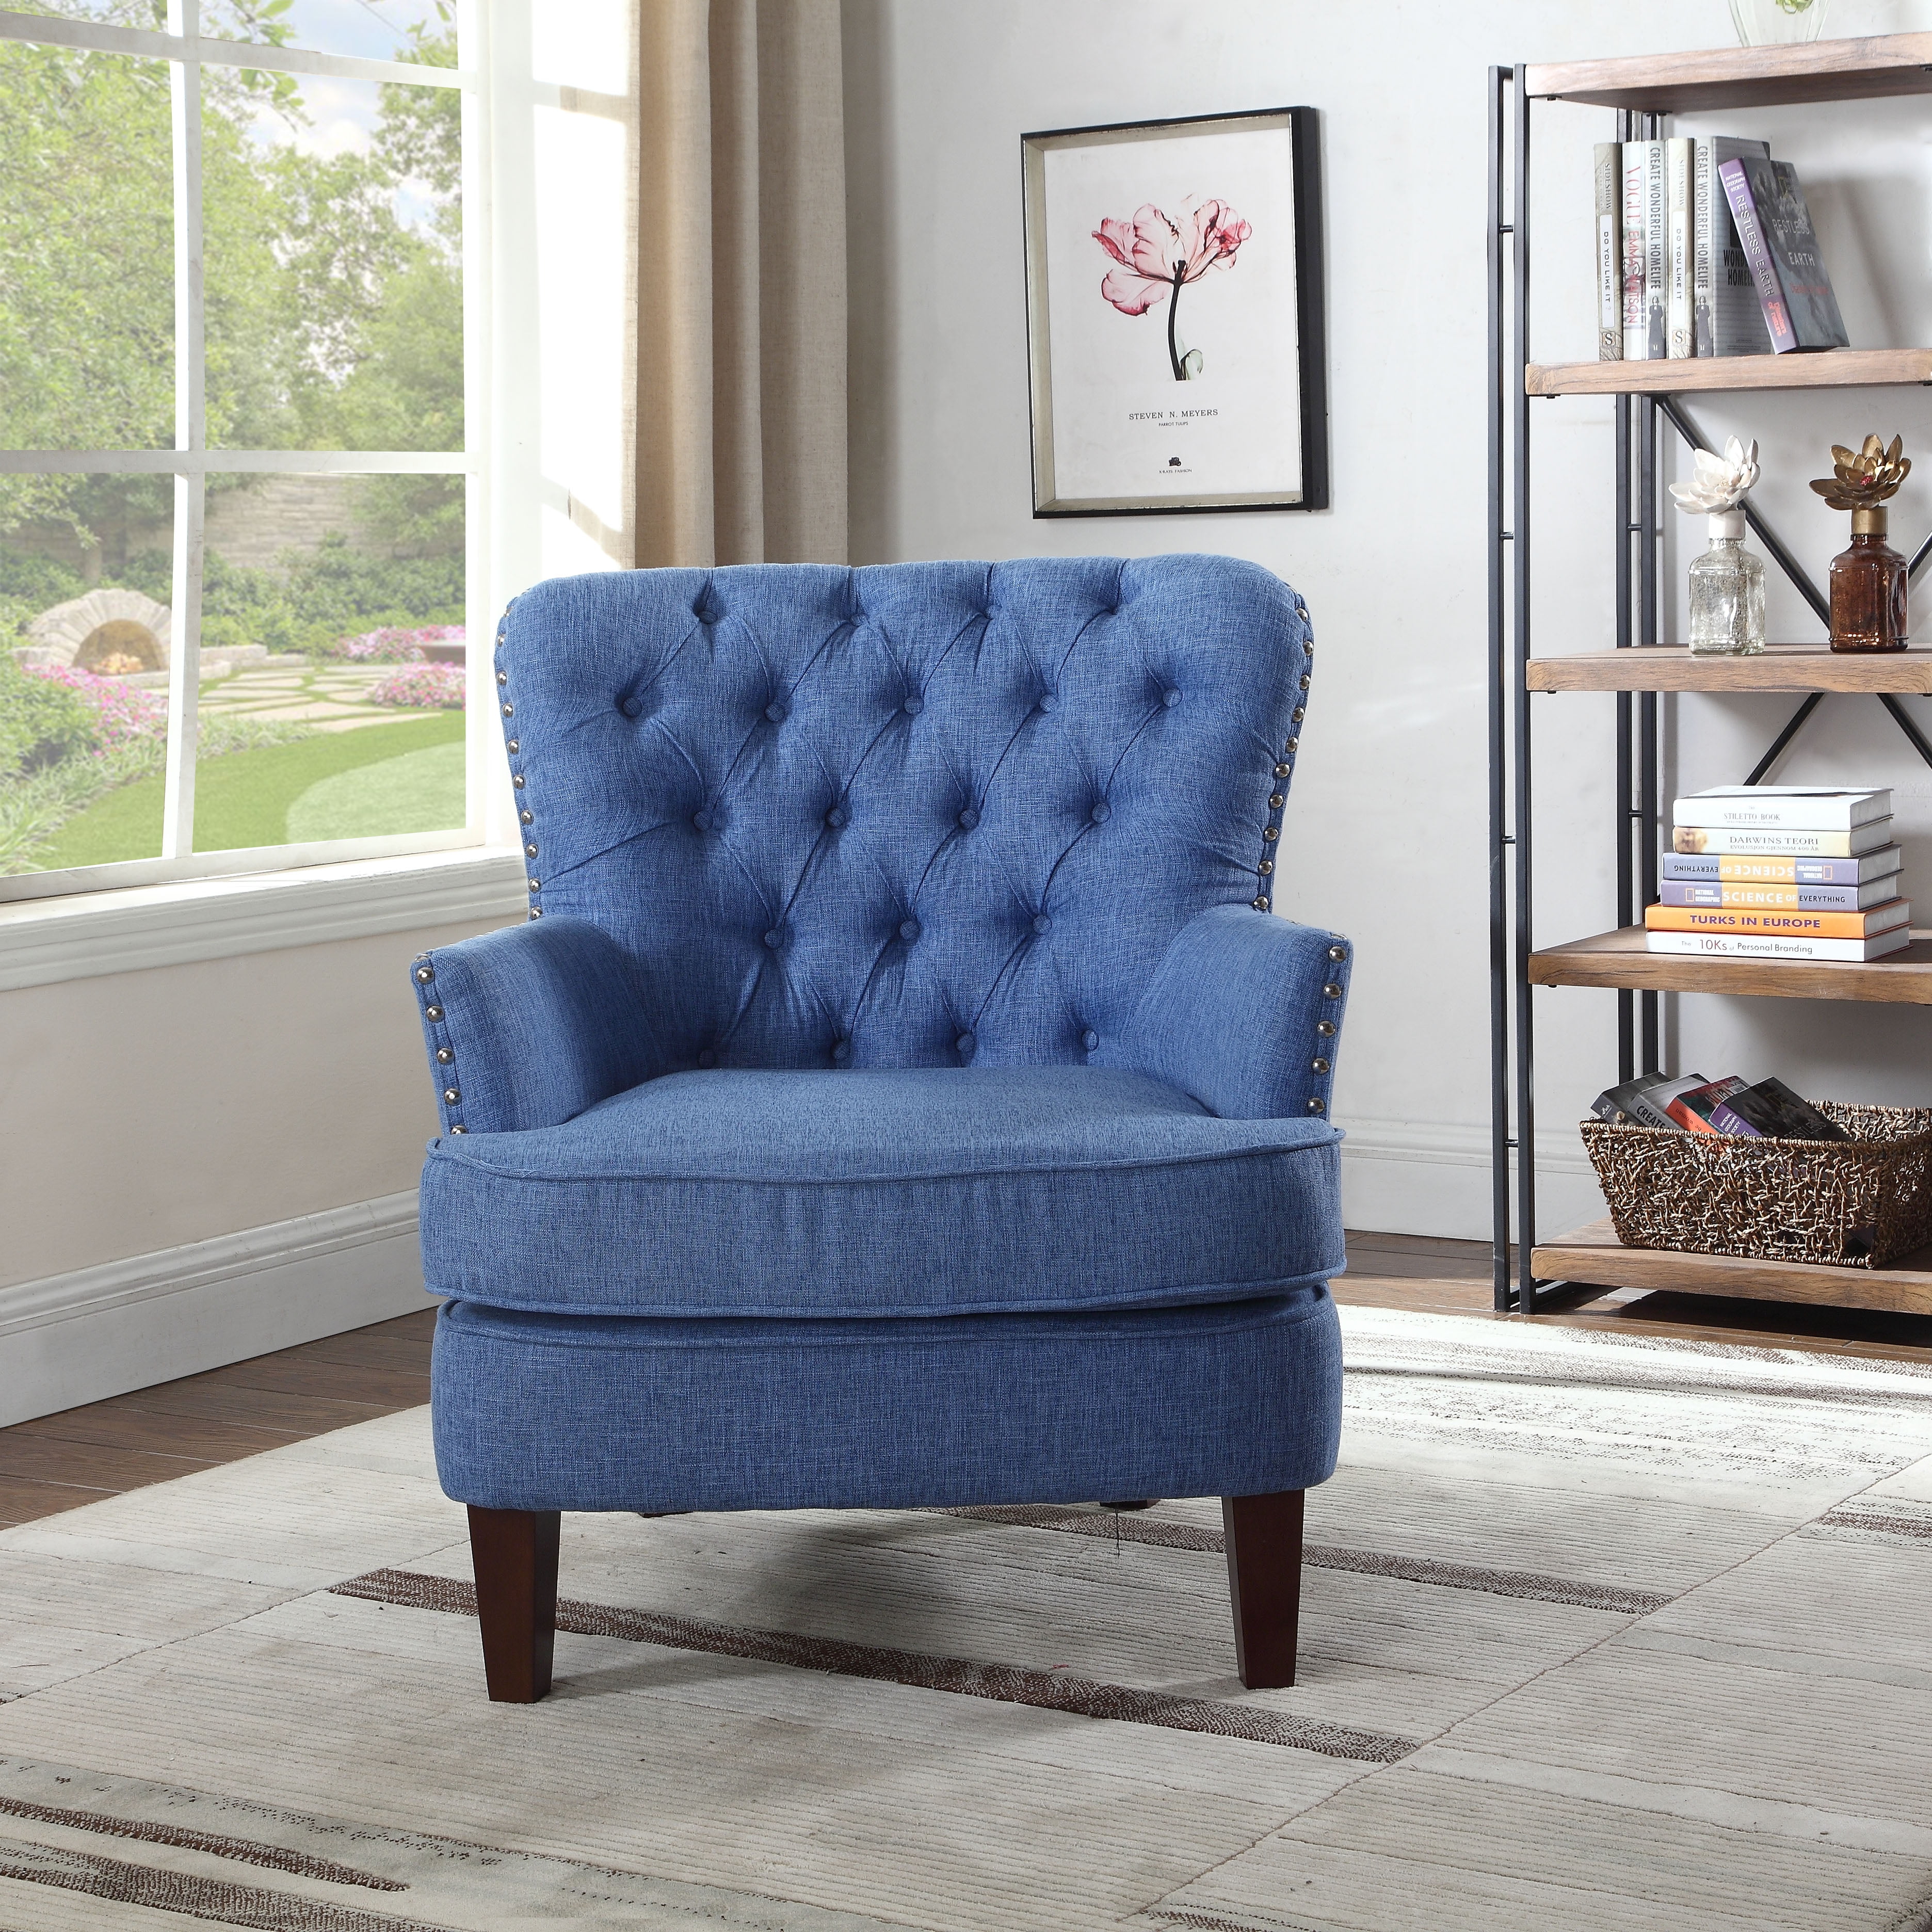 Button Tufted Accent Chair with Nailhead, Blue Color - Walmart.com